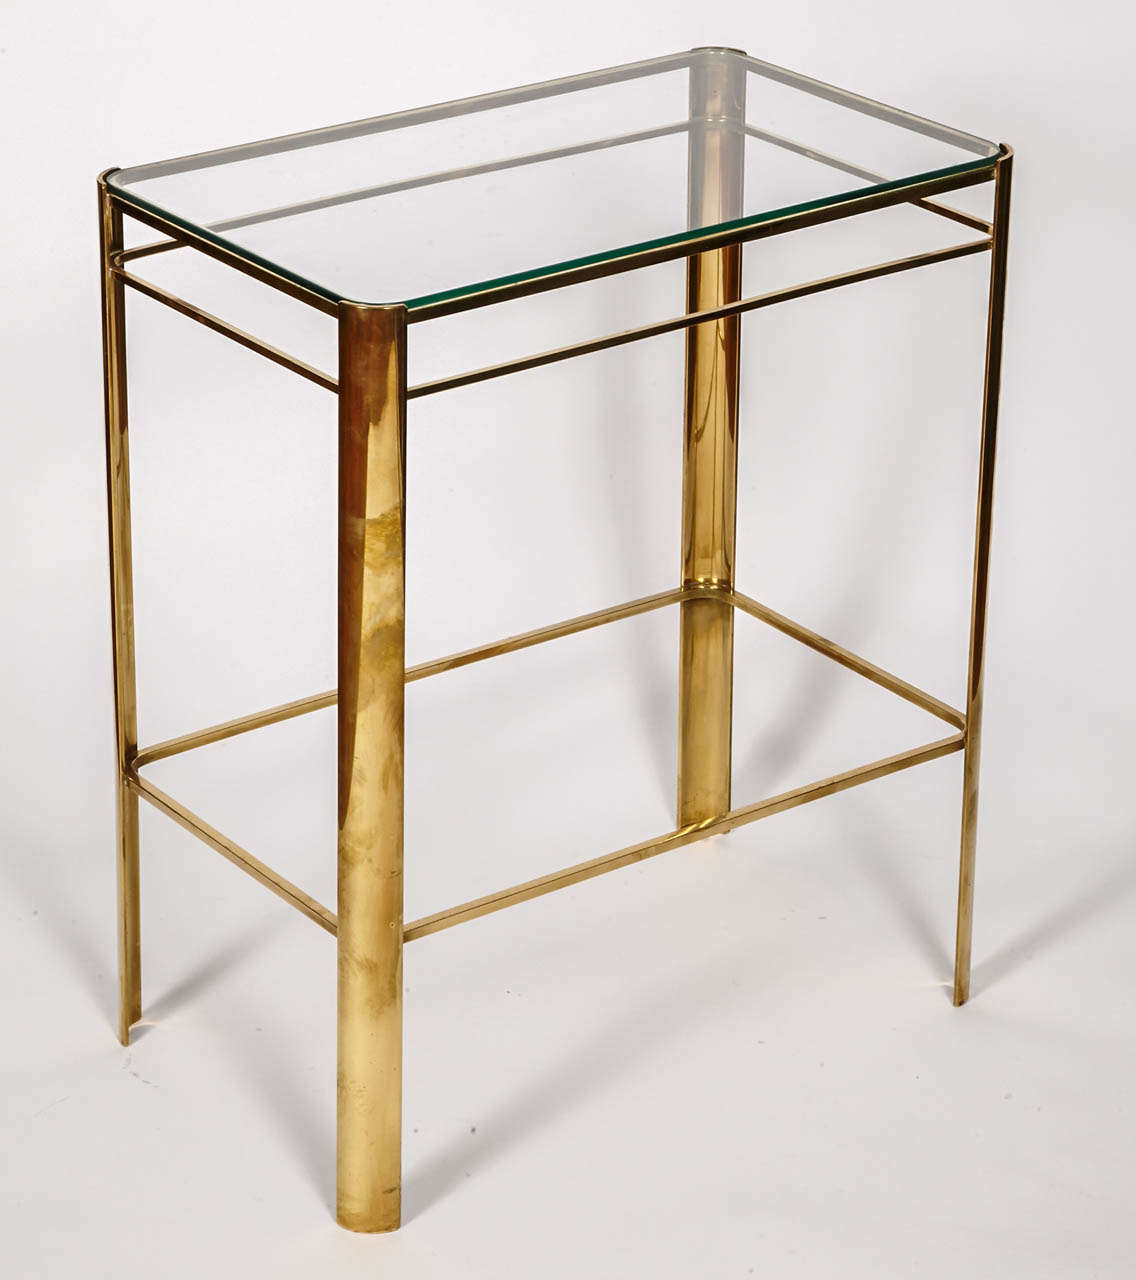 Bronze table by Jacques Quinet for Malabert.